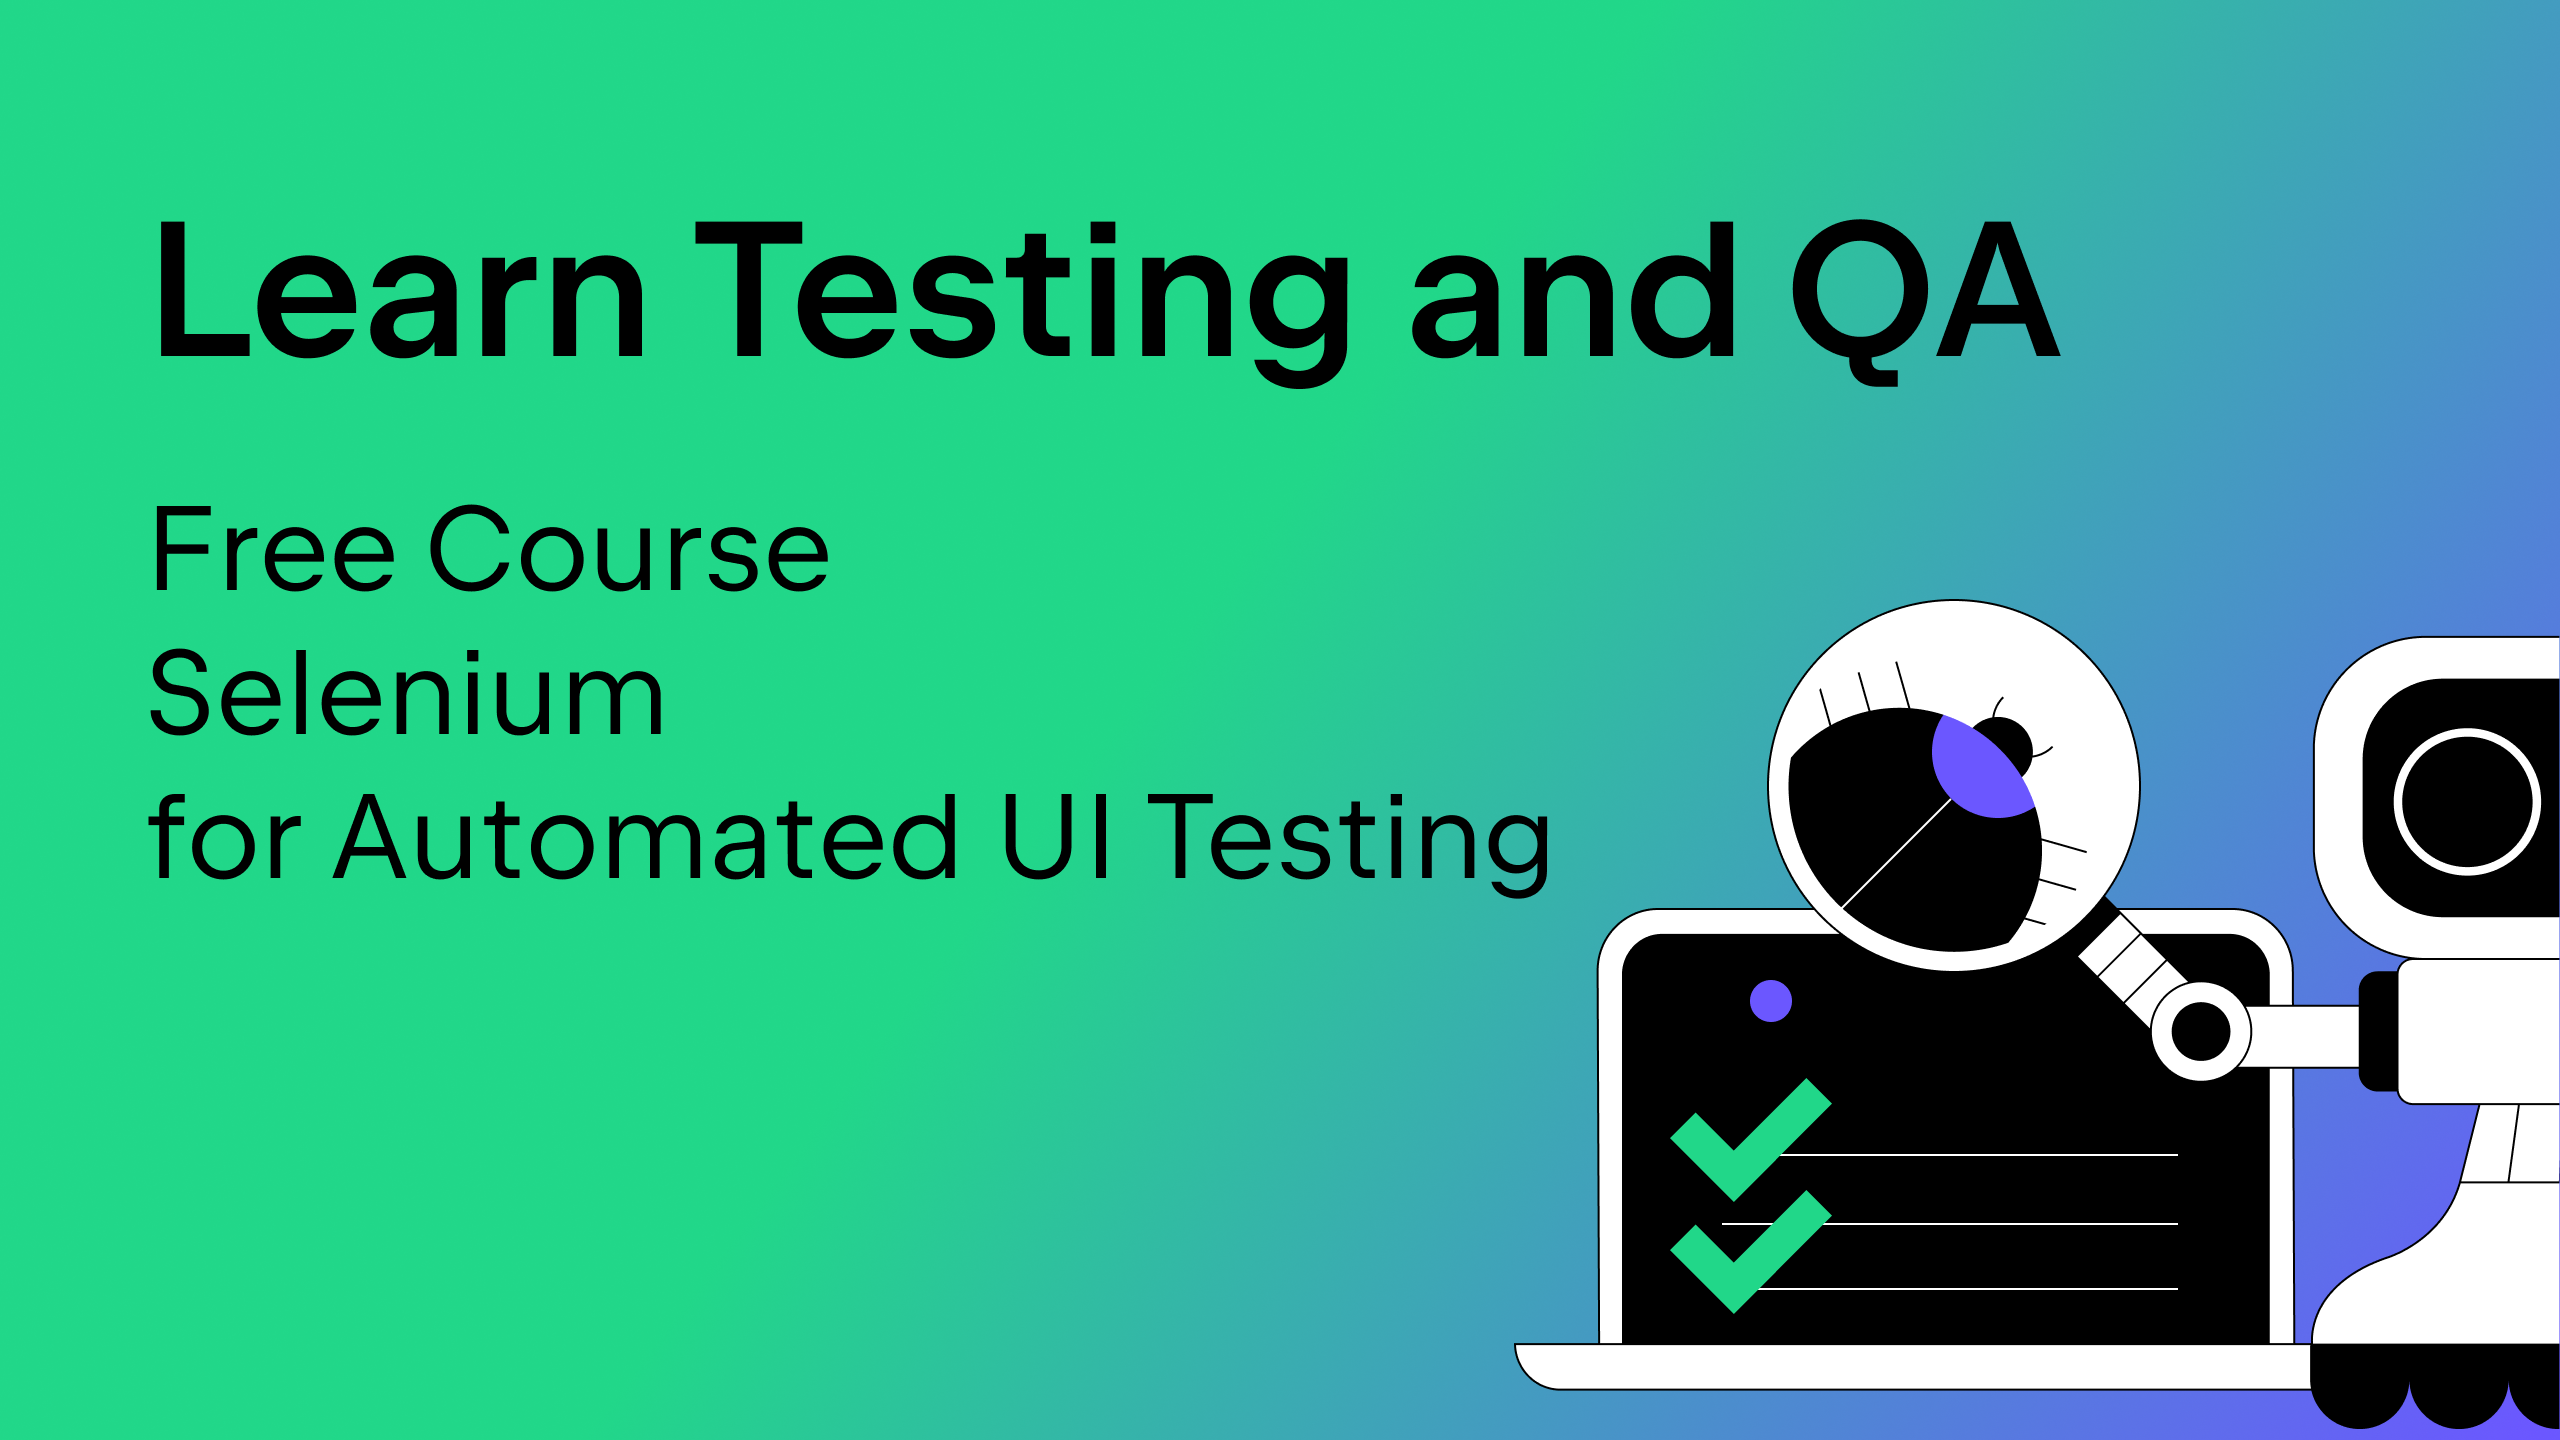 Learn Testing and QA Free Course Selenium for Automated UI Testing